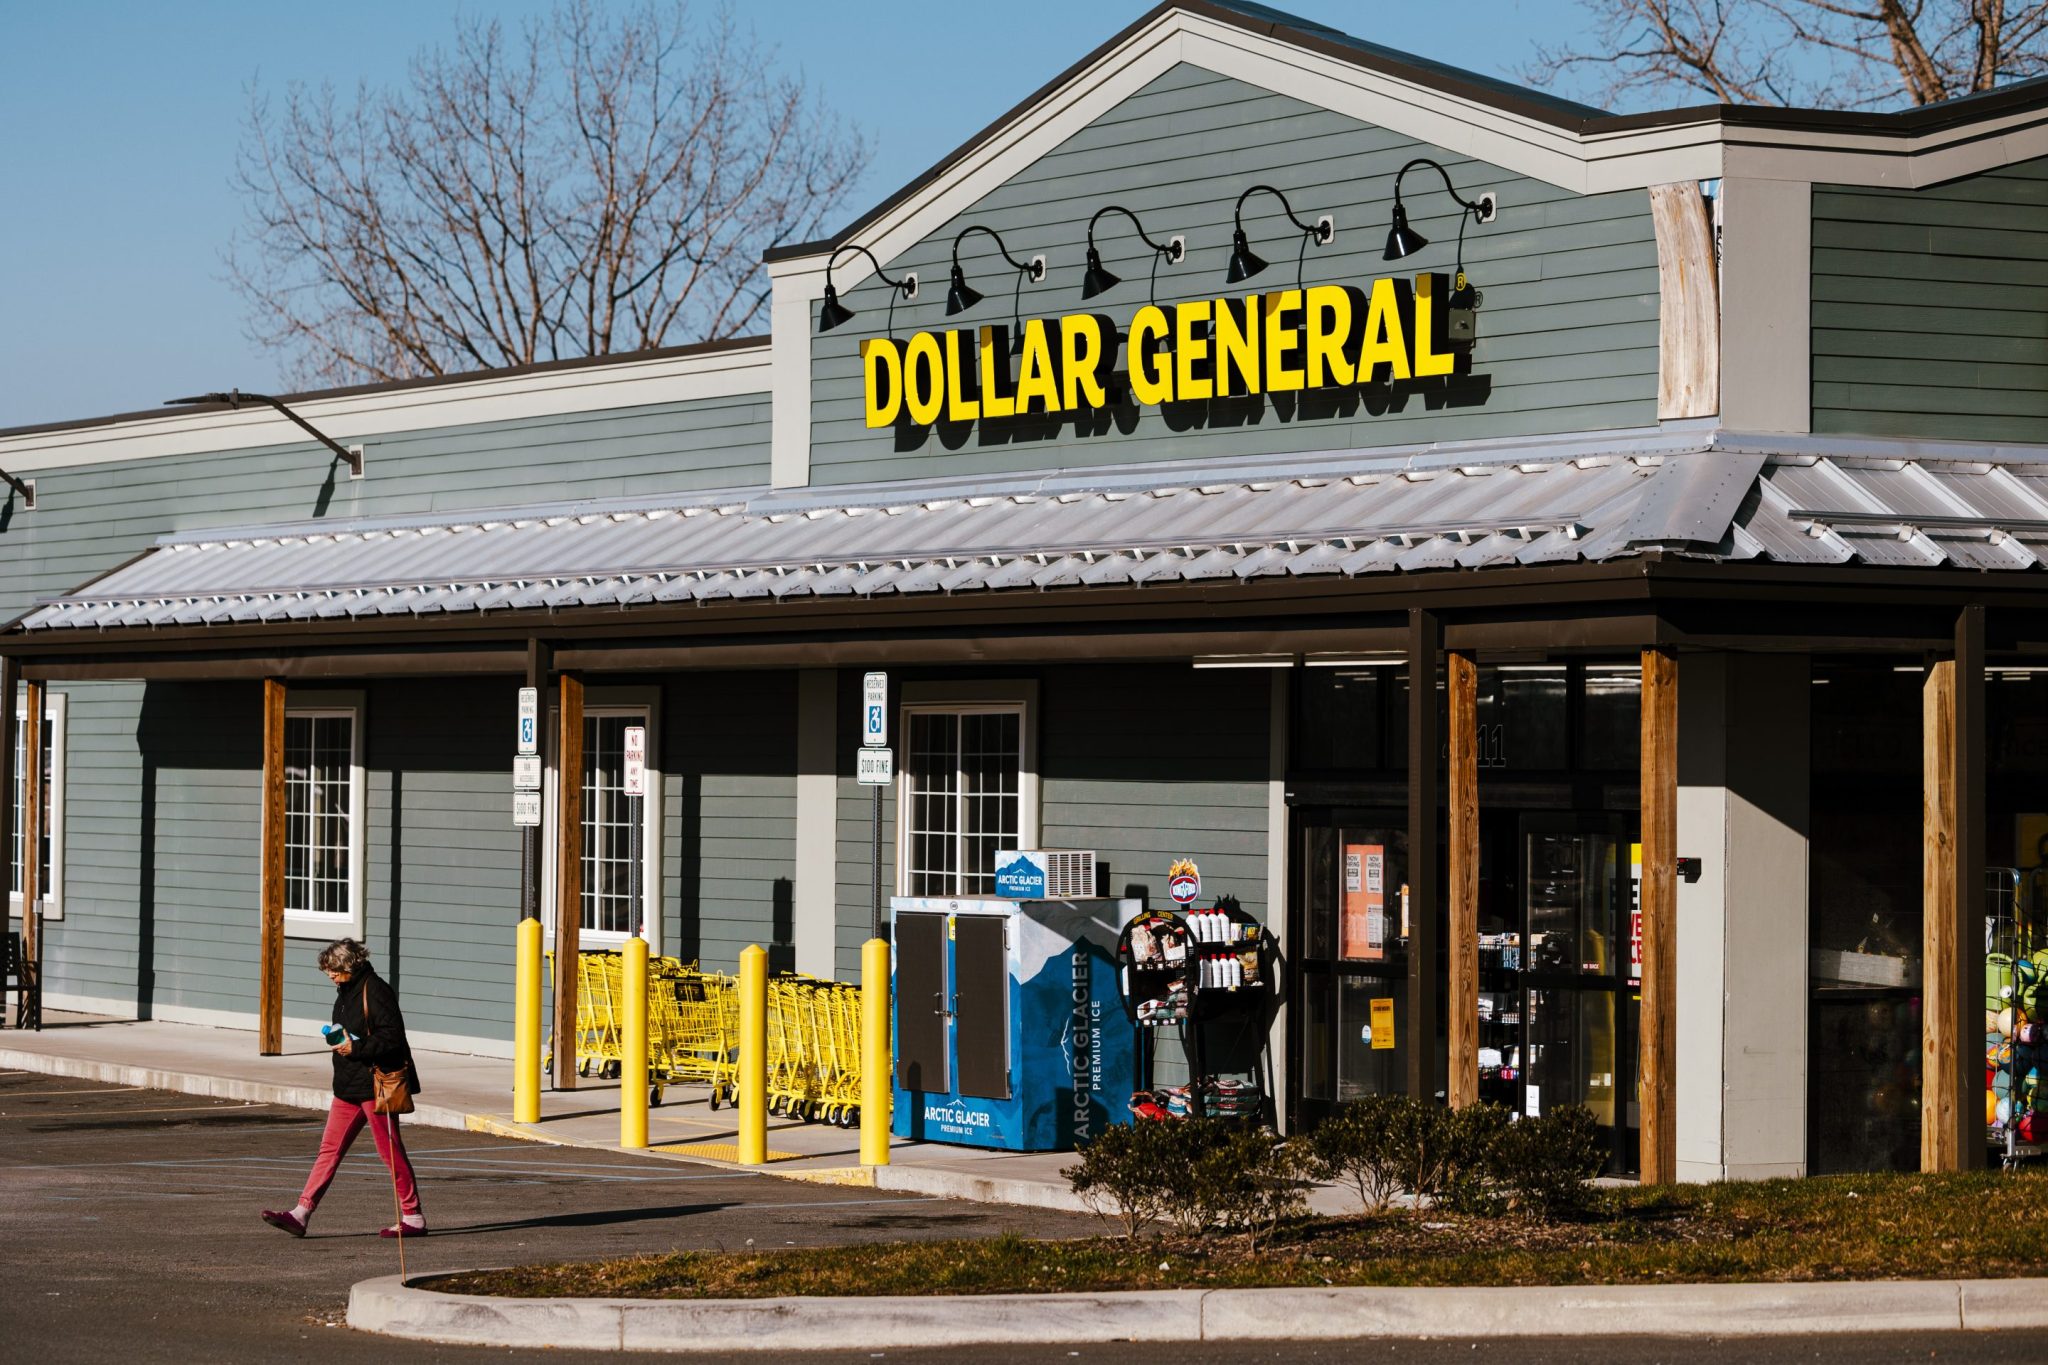 Dollar General is reducing self-checkout stations